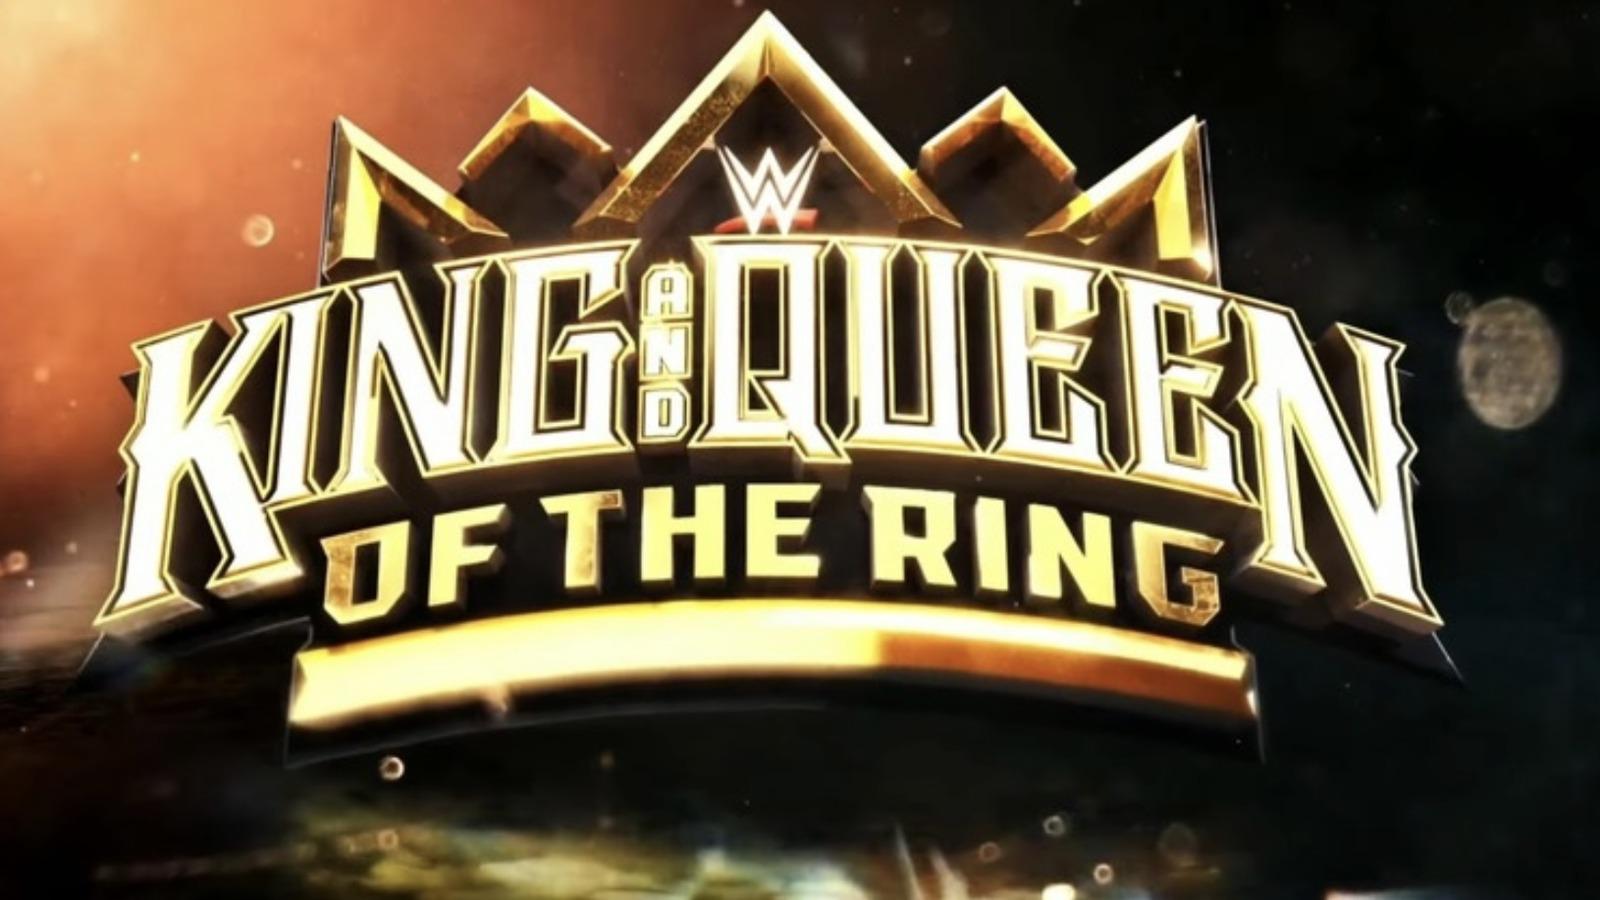 The WWE King and Queen of the Ring tournament has officially begun.